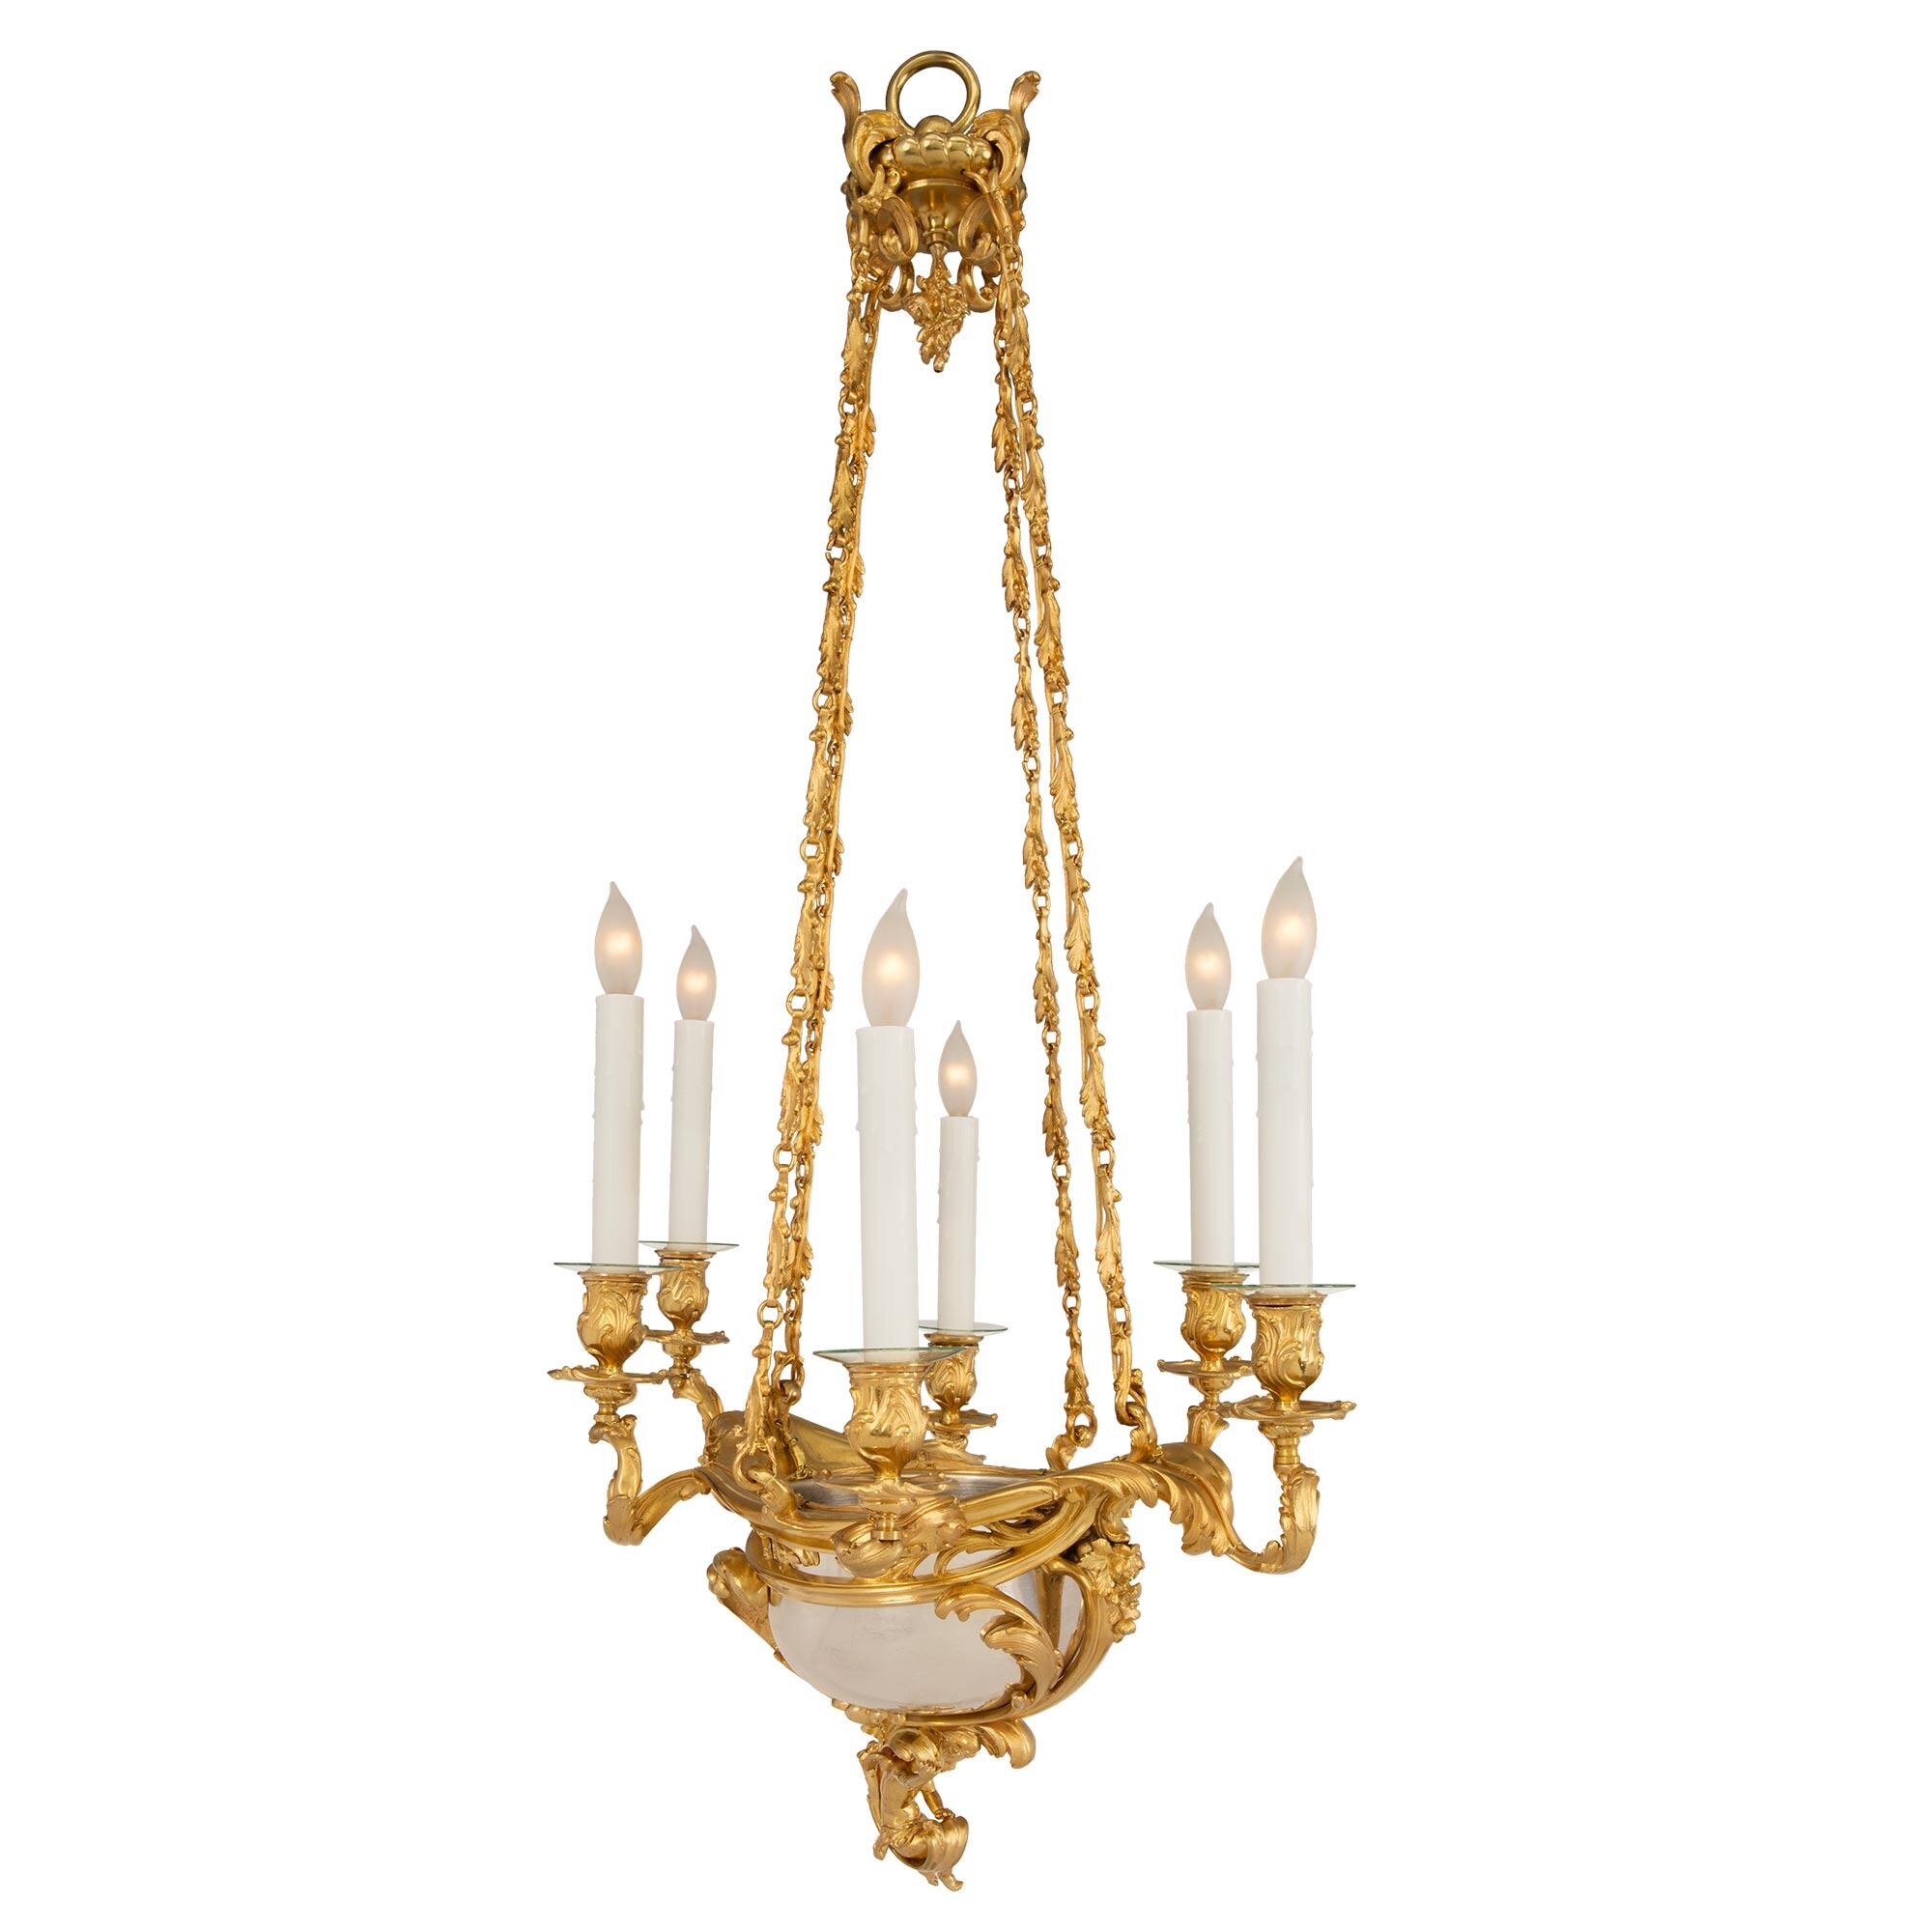 A French 19th century Louis XV st. silvered bronze and ormolu six light chandelier, attributed ...